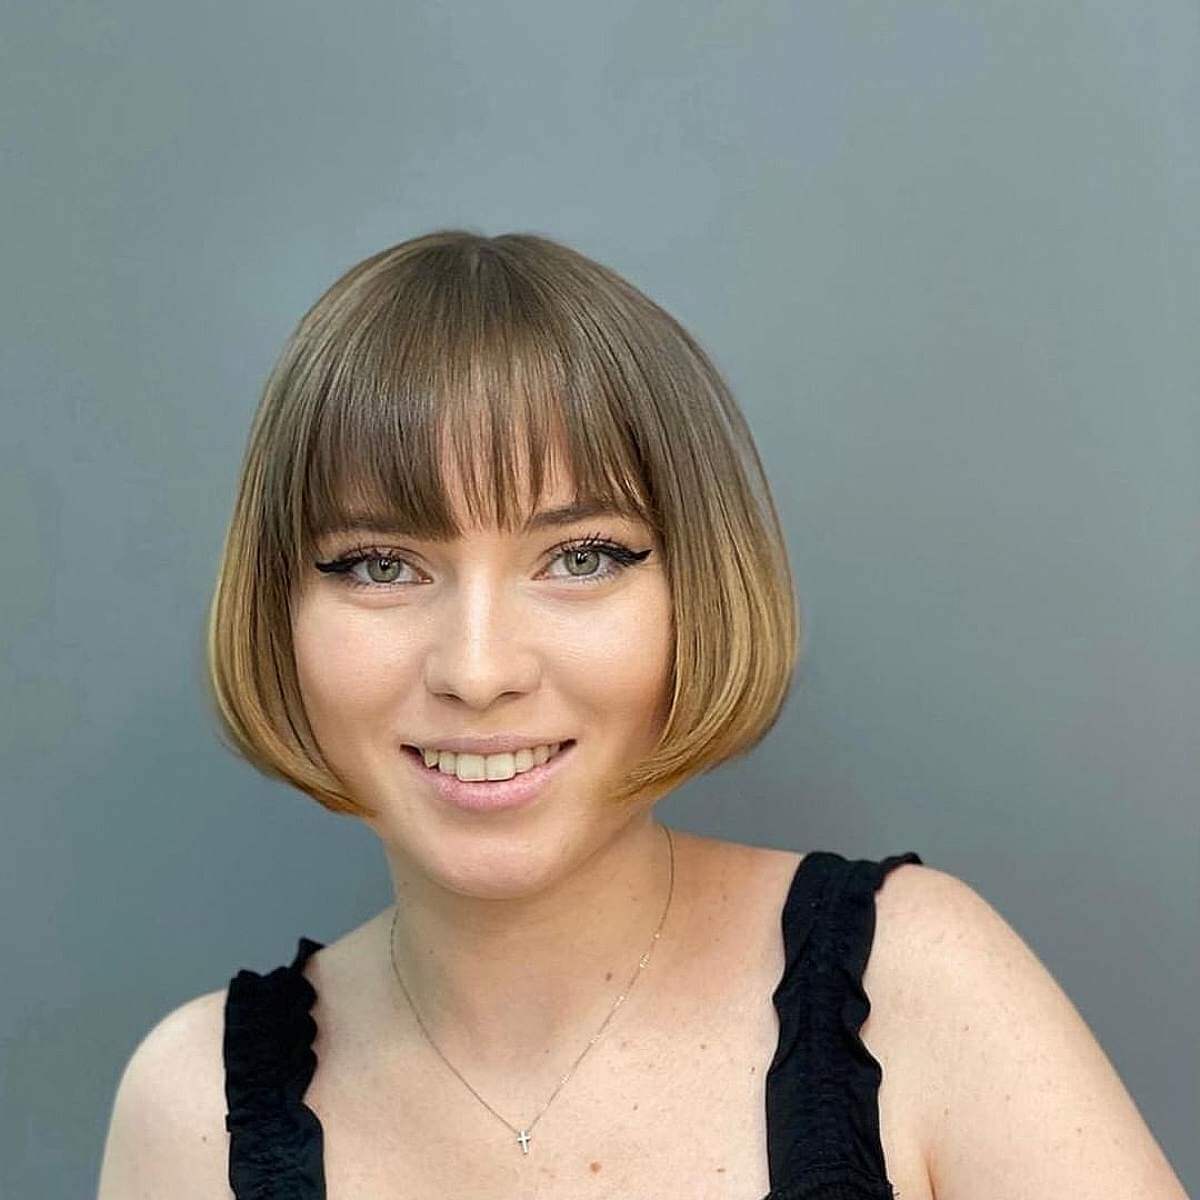 Trendy Short Ombre Bob with Light Bangs